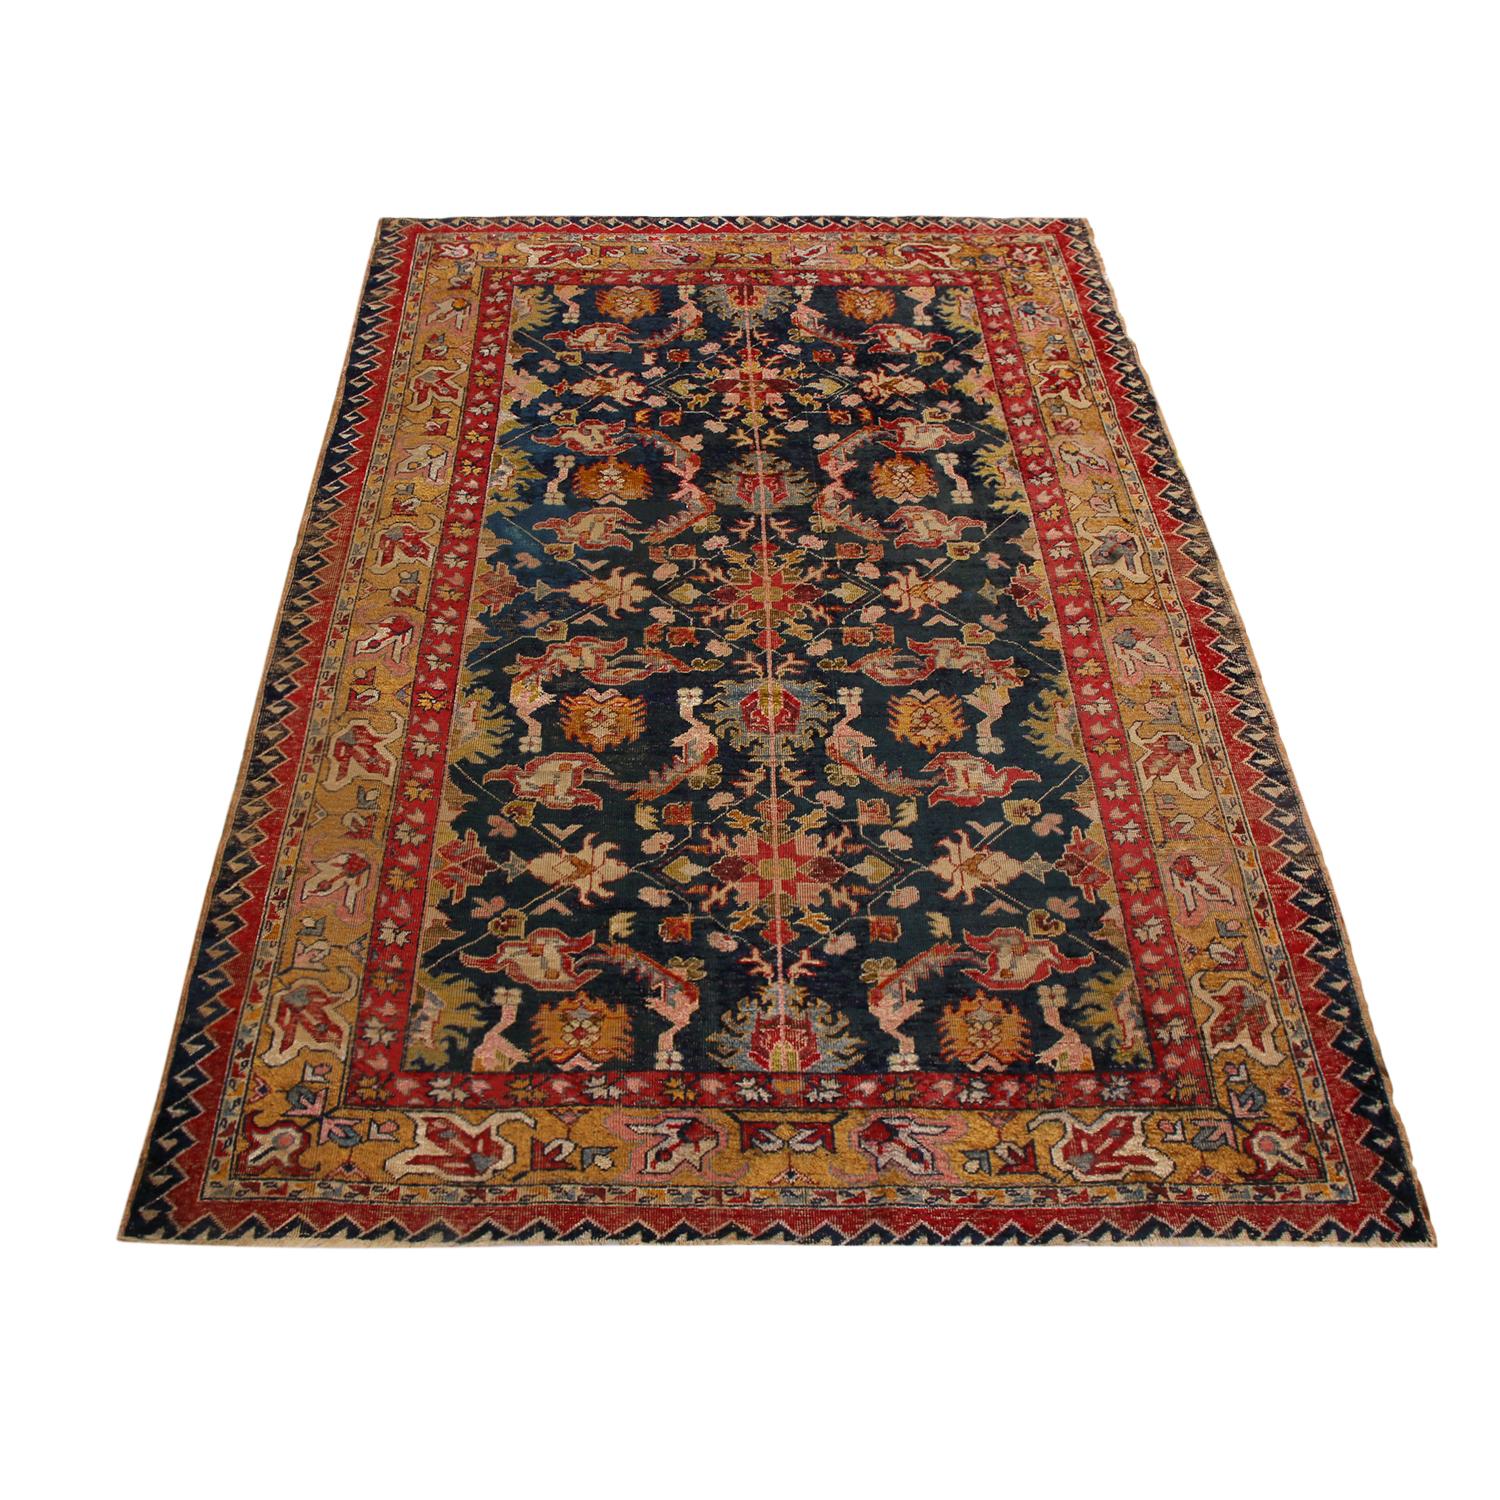 Enjoying a very tribal geometric-floral design and hand knotted, naturally luminous silk originating from Turkey in 1890, this antique Sivas rug is an ode to masterful symmetry in color and pattern, mirrored from the center outward in an